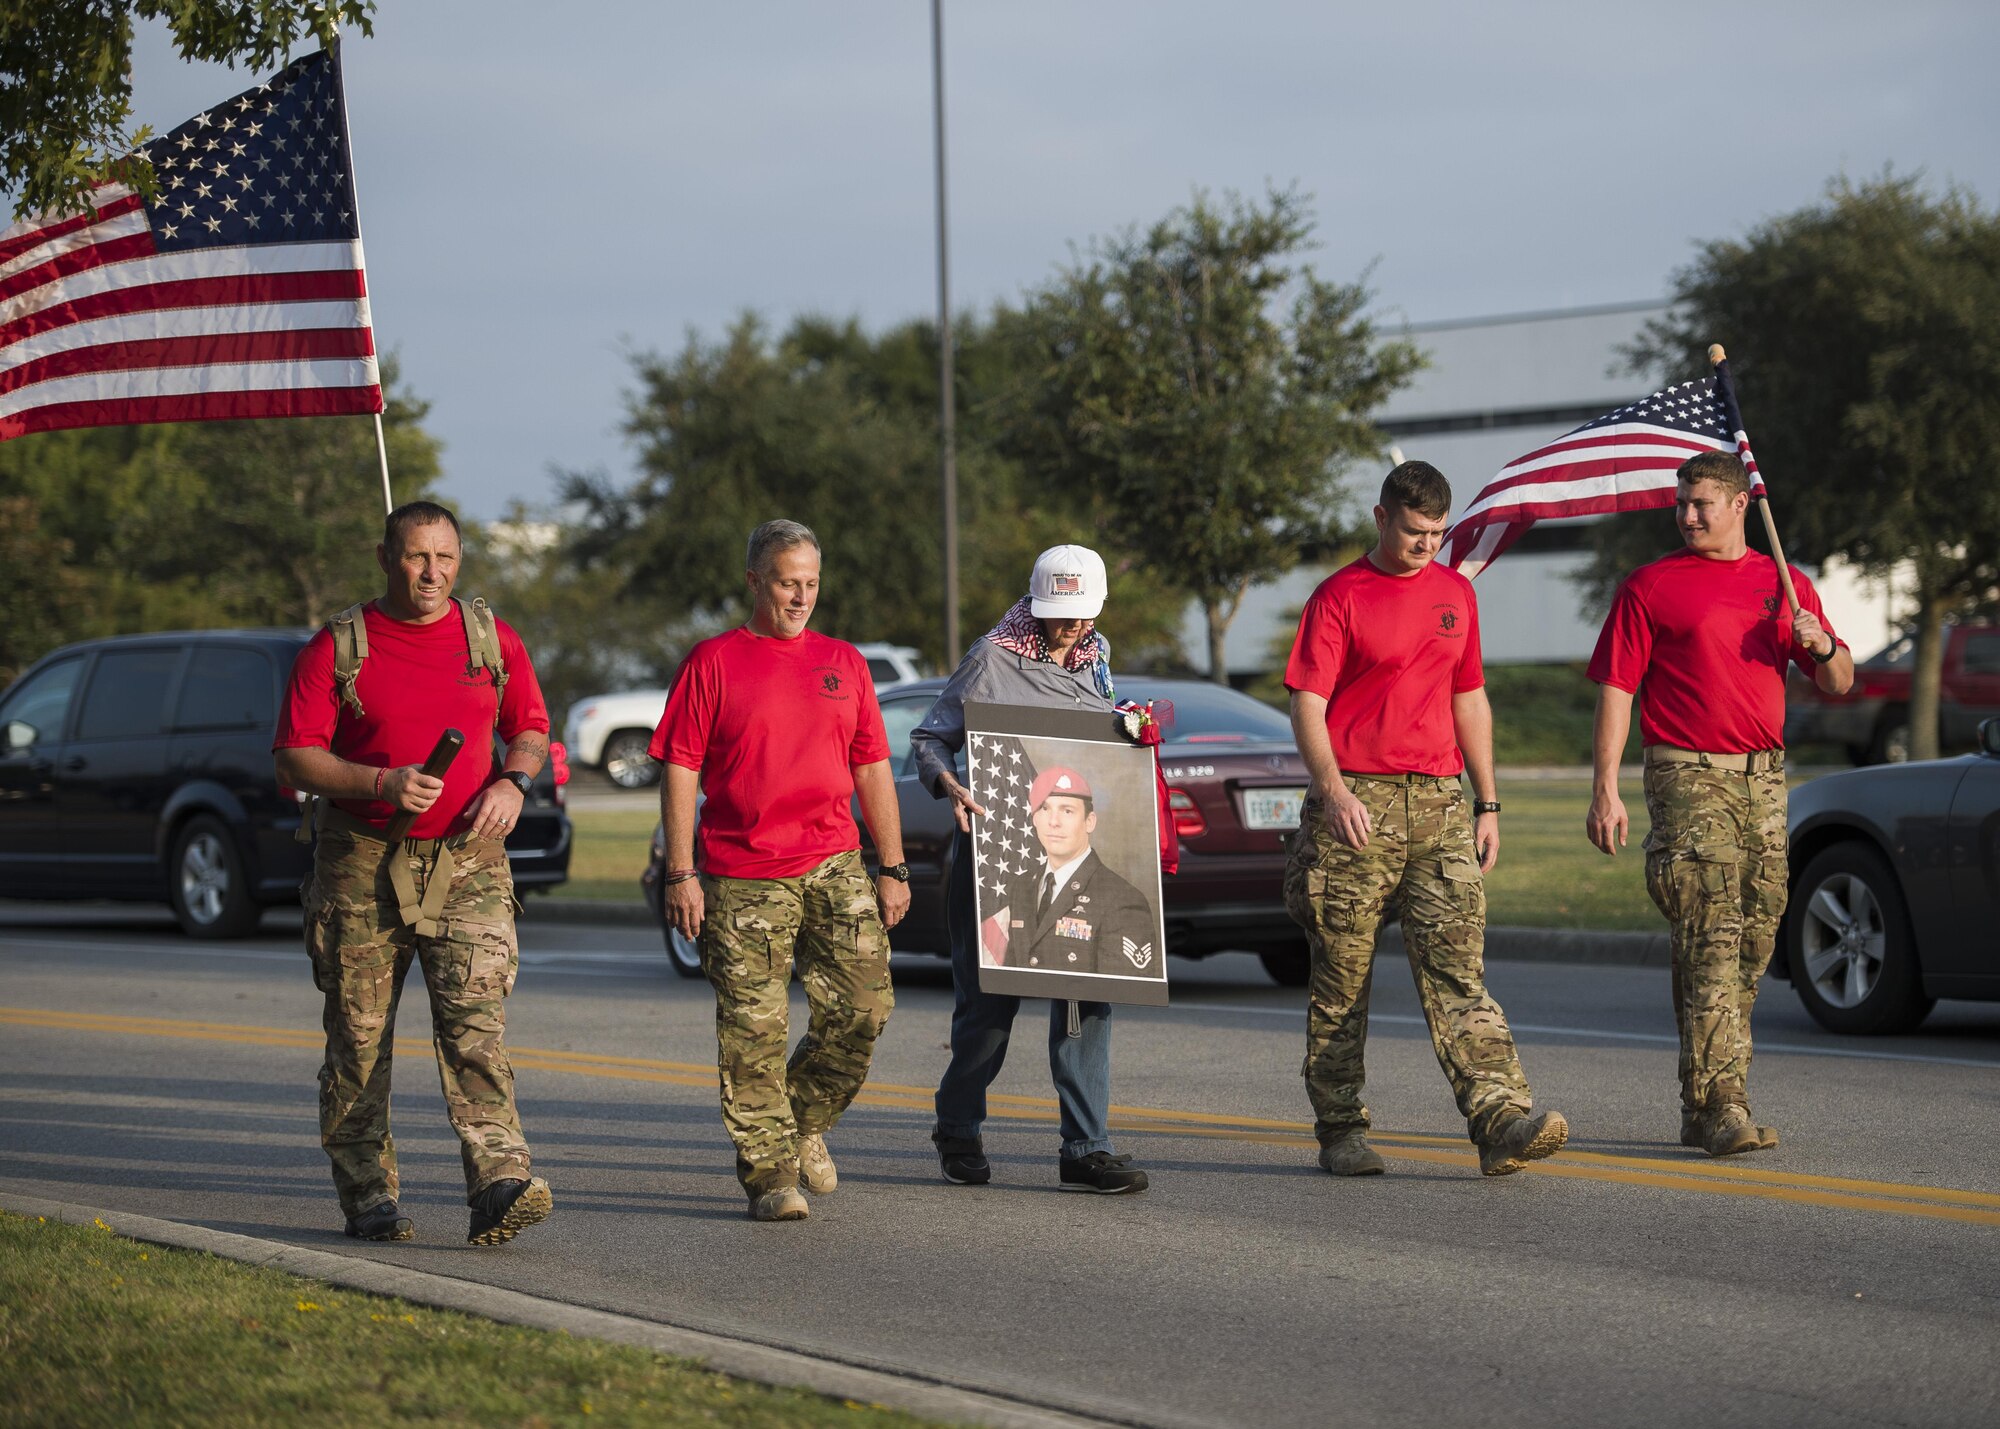 A grandmother of one of the fallen Special Tactics Airmen carries a photo in honor of her loved one to a Baton Ceremony on Hurlburt Field, Fla., Oct. 13, 2015. The team of 20 Special Tactics Airmen started at 2 a.m. on Oct. 4, from Joint Base San Antonio-Lackland, Texas, and marched 812 miles through five states to meet with the gold star families and end the memorial march with a ceremony on Hurlburt Field. Each two-man team walked approximately 90 miles during the 10-day trek while carrying a 50-pound ruck sack and a commemorative baton engraved with a fallen Special Tactics Airman's name. The memorial march is only held when a Special Tactics operator is killed in action that year, but honors all 19 Special Tactics pararescuemen and combat controllers who have been killed in action since 2001. (U.S. Air Force photo by Airman Kai White/Released)
